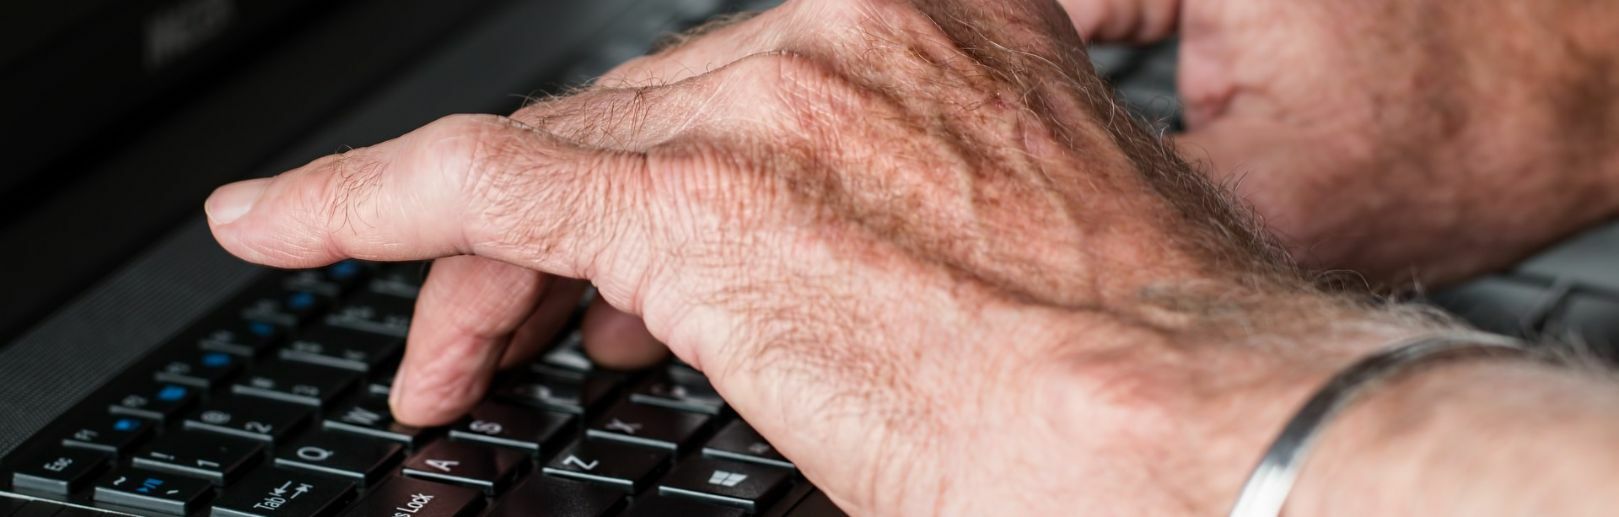 Using the internet is good for older people, researchers find, even halving the risk of dementia.  Church fellowships can help those who are not yet connected.